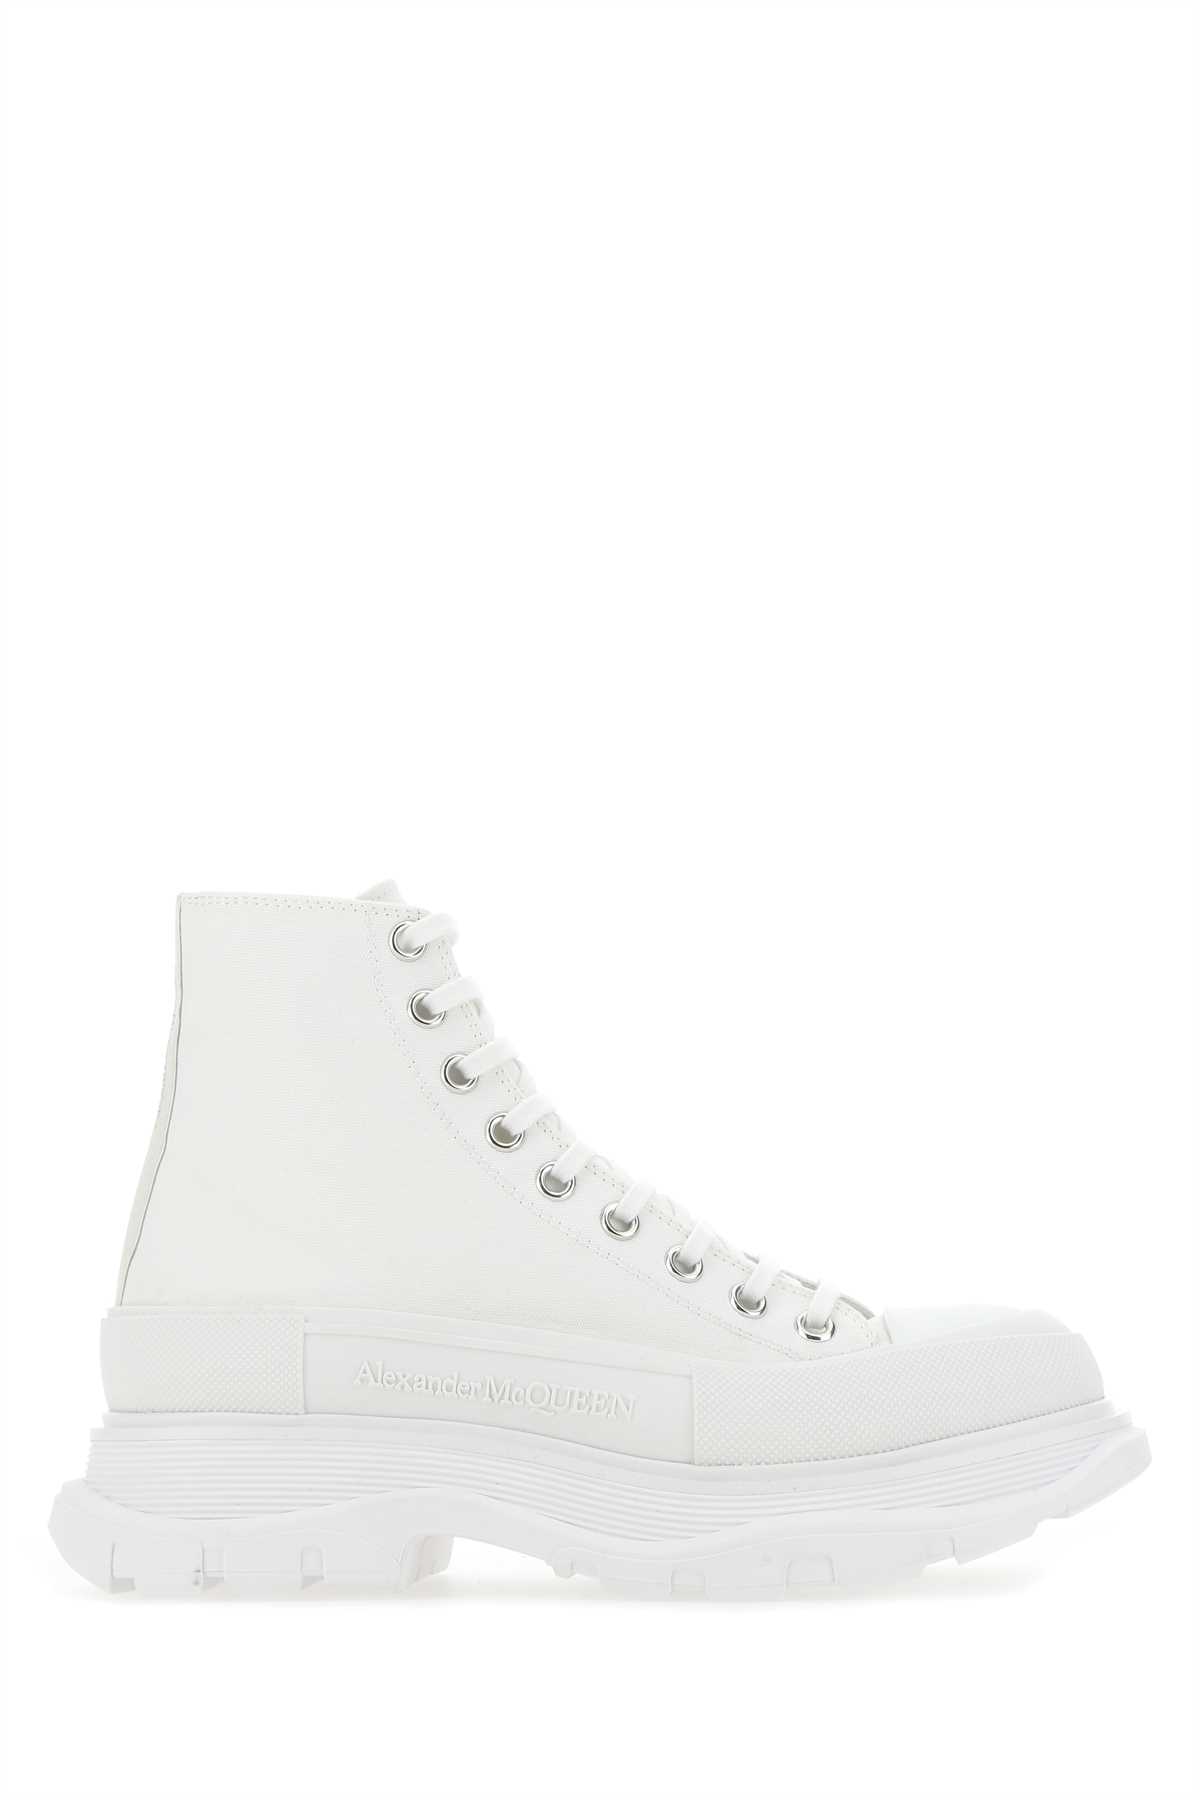 White Canvas And Rubber Tread Slick Sneakers